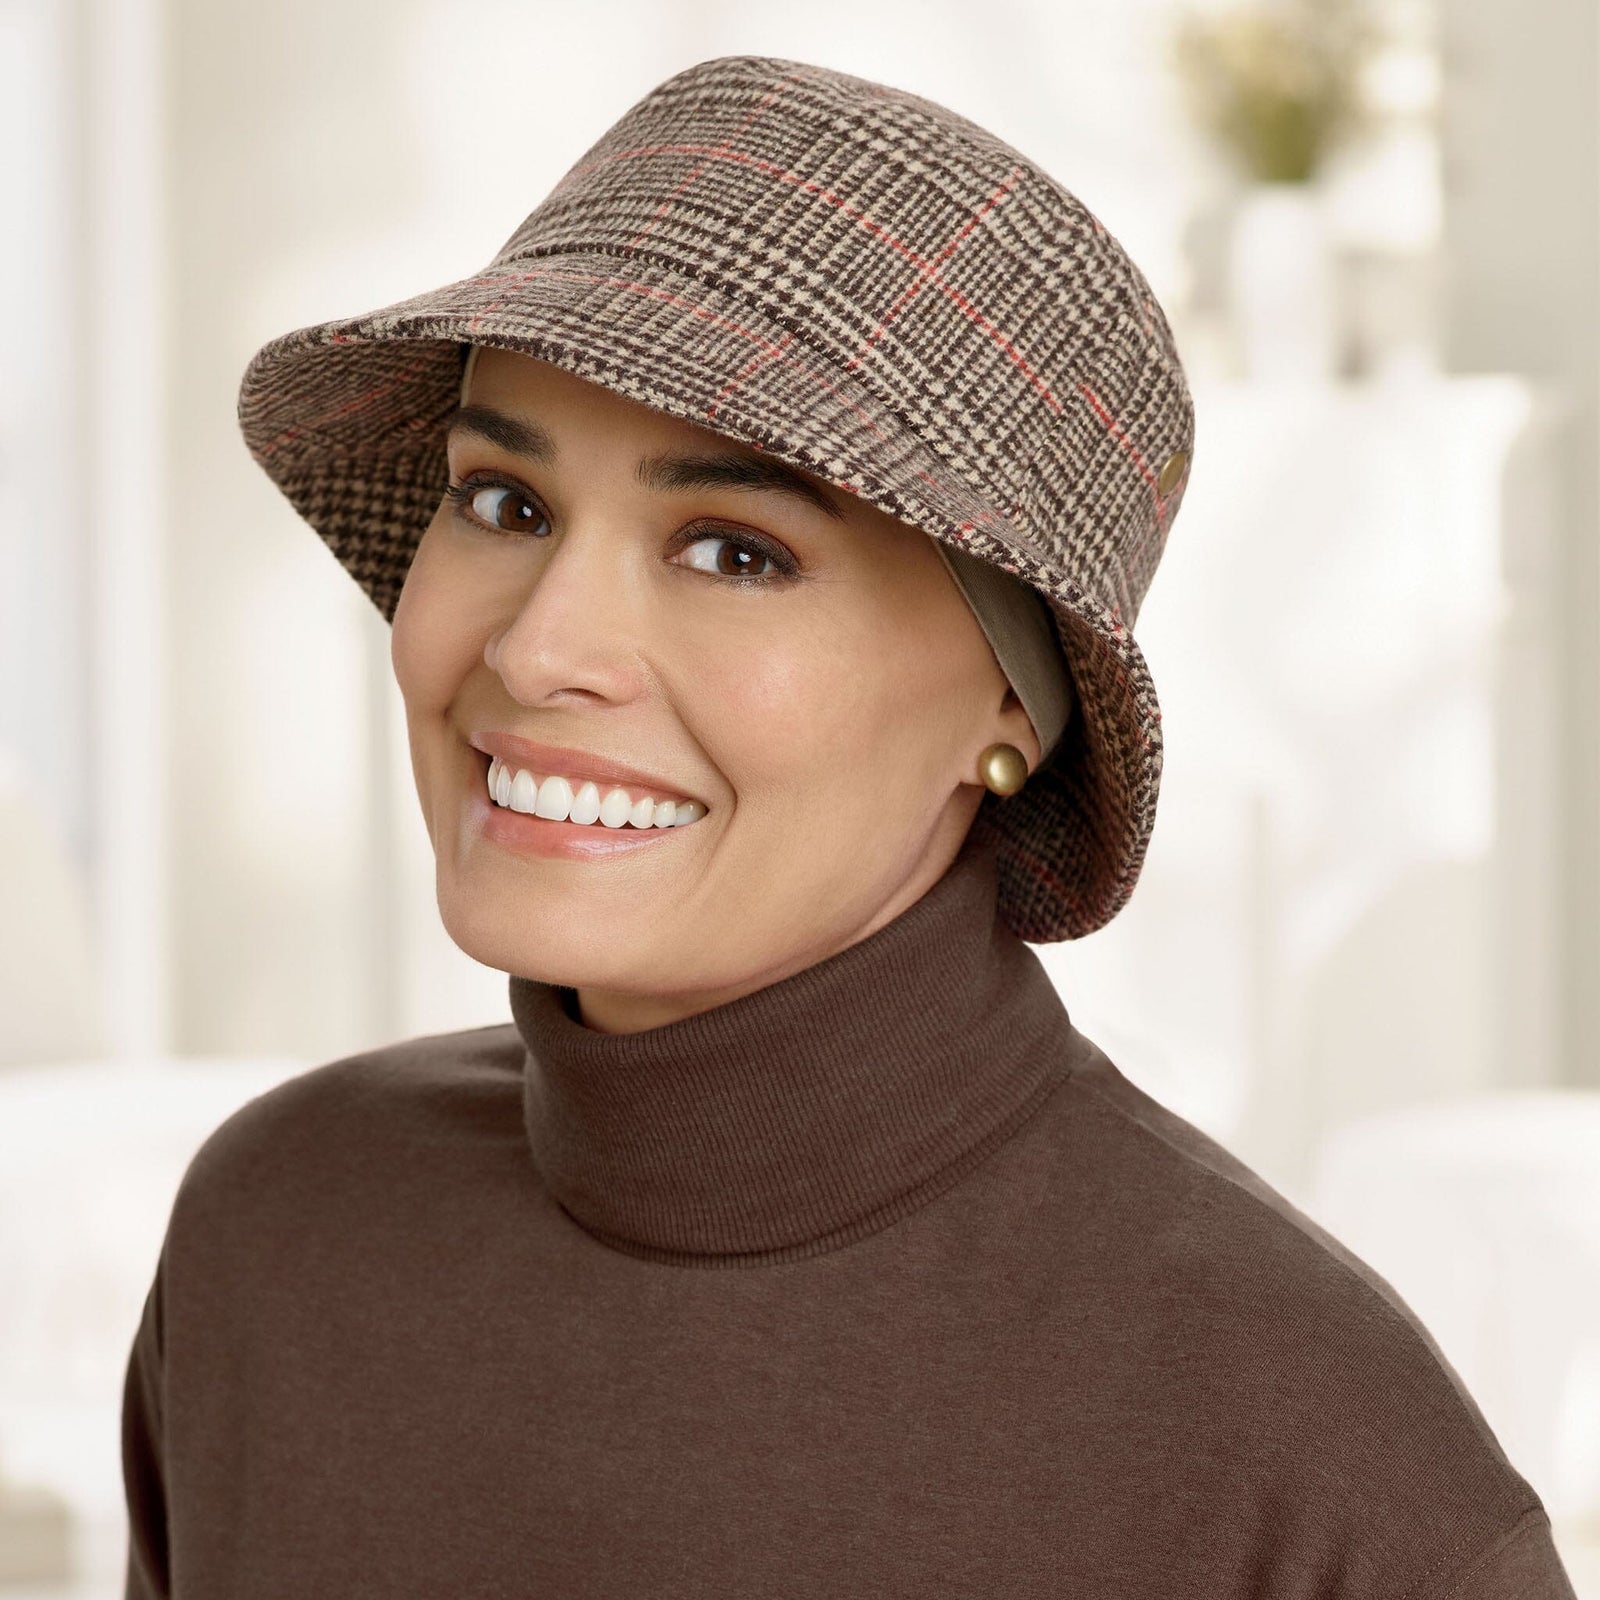 Ars Impex 100% Padded Cotton Hat Liner - White Petite/Average - Cancer & Chemotherapy Hats